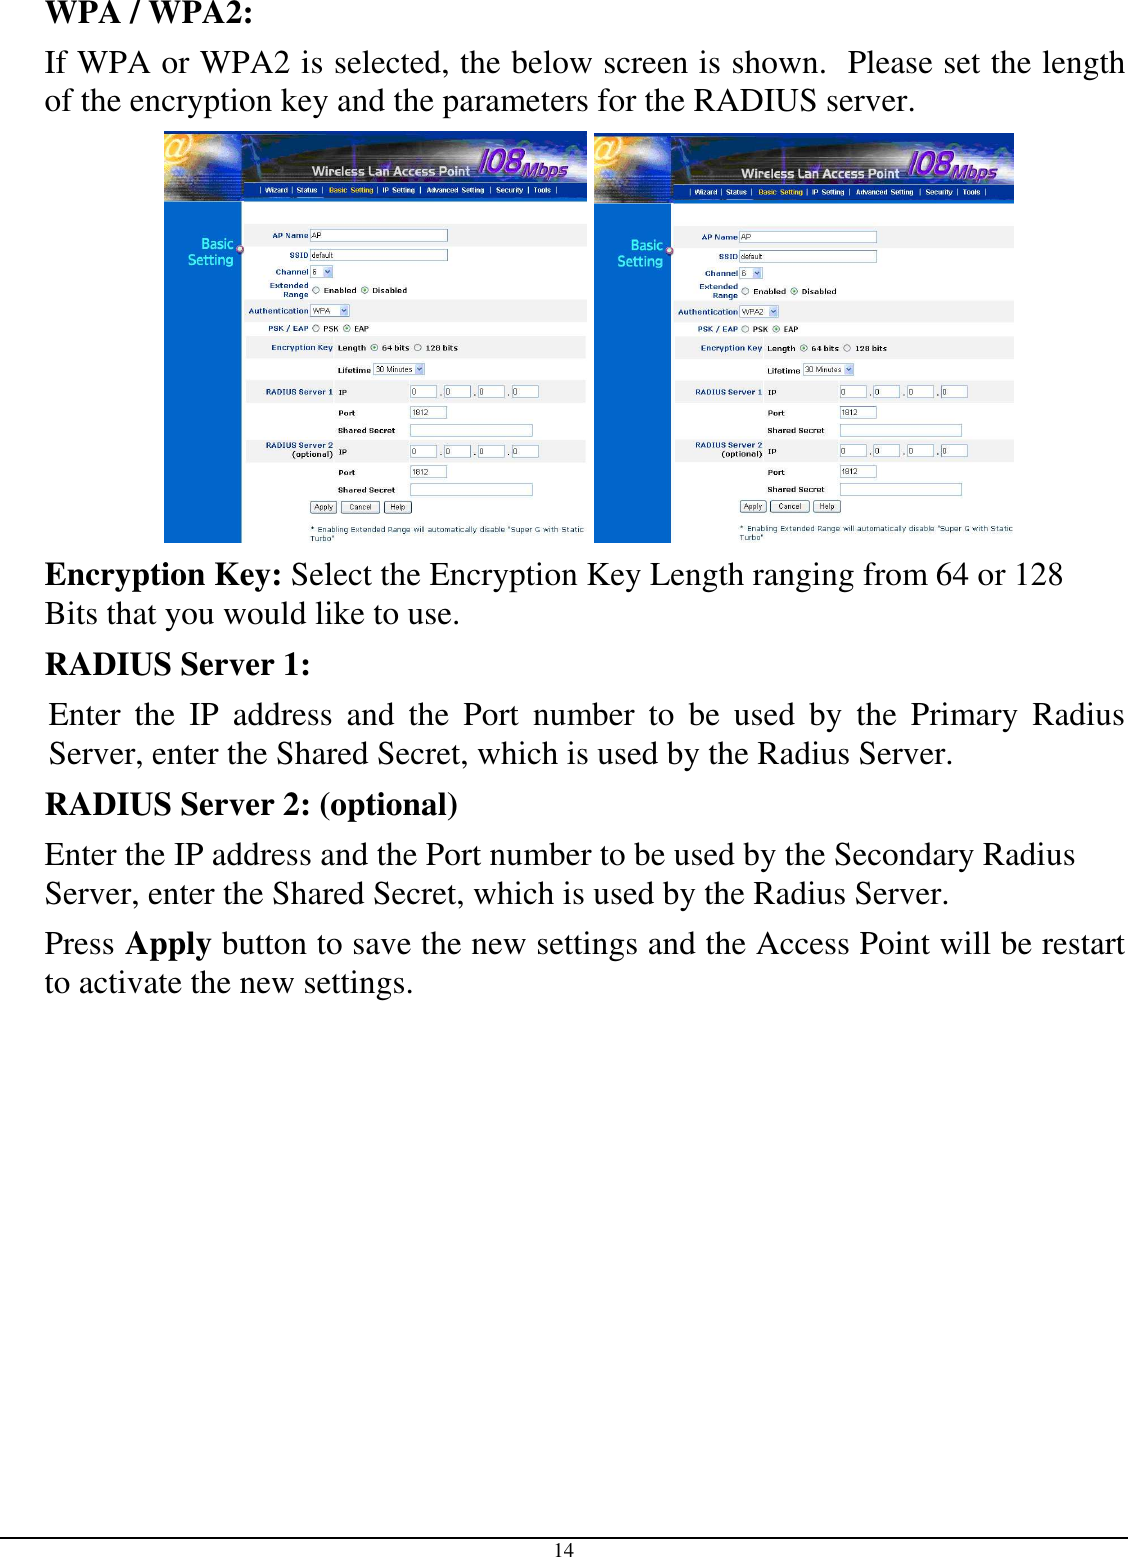  14 WPA / WPA2:  If WPA or WPA2 is selected, the below screen is shown.  Please set the length of the encryption key and the parameters for the RADIUS server.      Encryption Key: Select the Encryption Key Length ranging from 64 or 128 Bits that you would like to use. RADIUS Server 1:  Enter  the  IP  address  and  the  Port  number  to  be  used  by  the  Primary  Radius Server, enter the Shared Secret, which is used by the Radius Server. RADIUS Server 2: (optional) Enter the IP address and the Port number to be used by the Secondary Radius Server, enter the Shared Secret, which is used by the Radius Server.  Press Apply button to save the new settings and the Access Point will be restart to activate the new settings. 